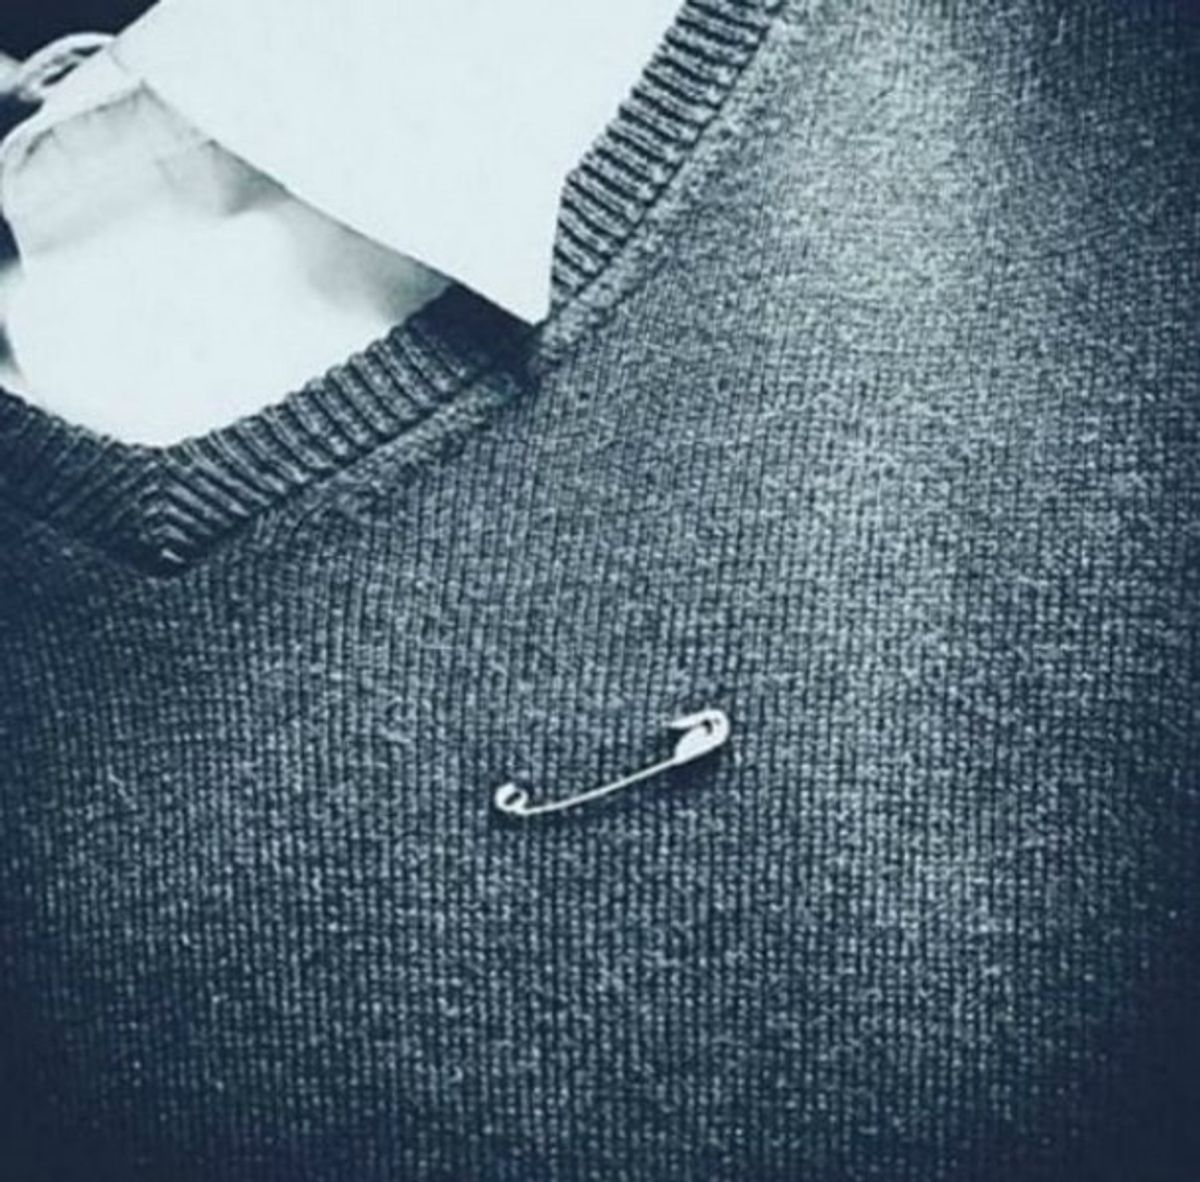 The Safety Pin: What It Means To Me